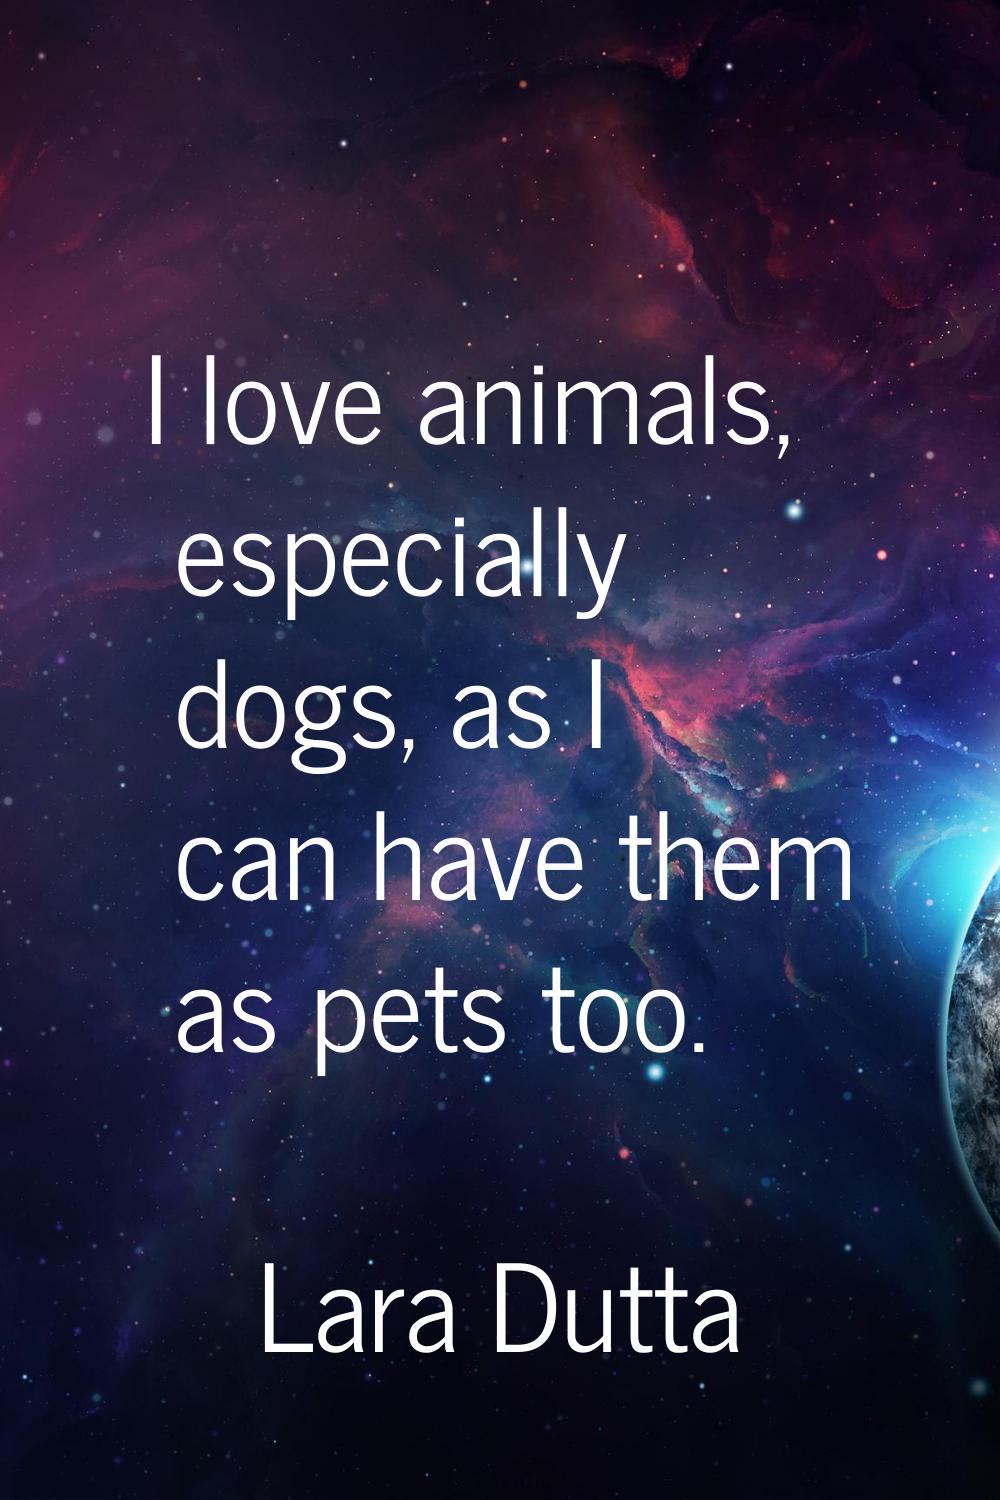 I love animals, especially dogs, as I can have them as pets too.